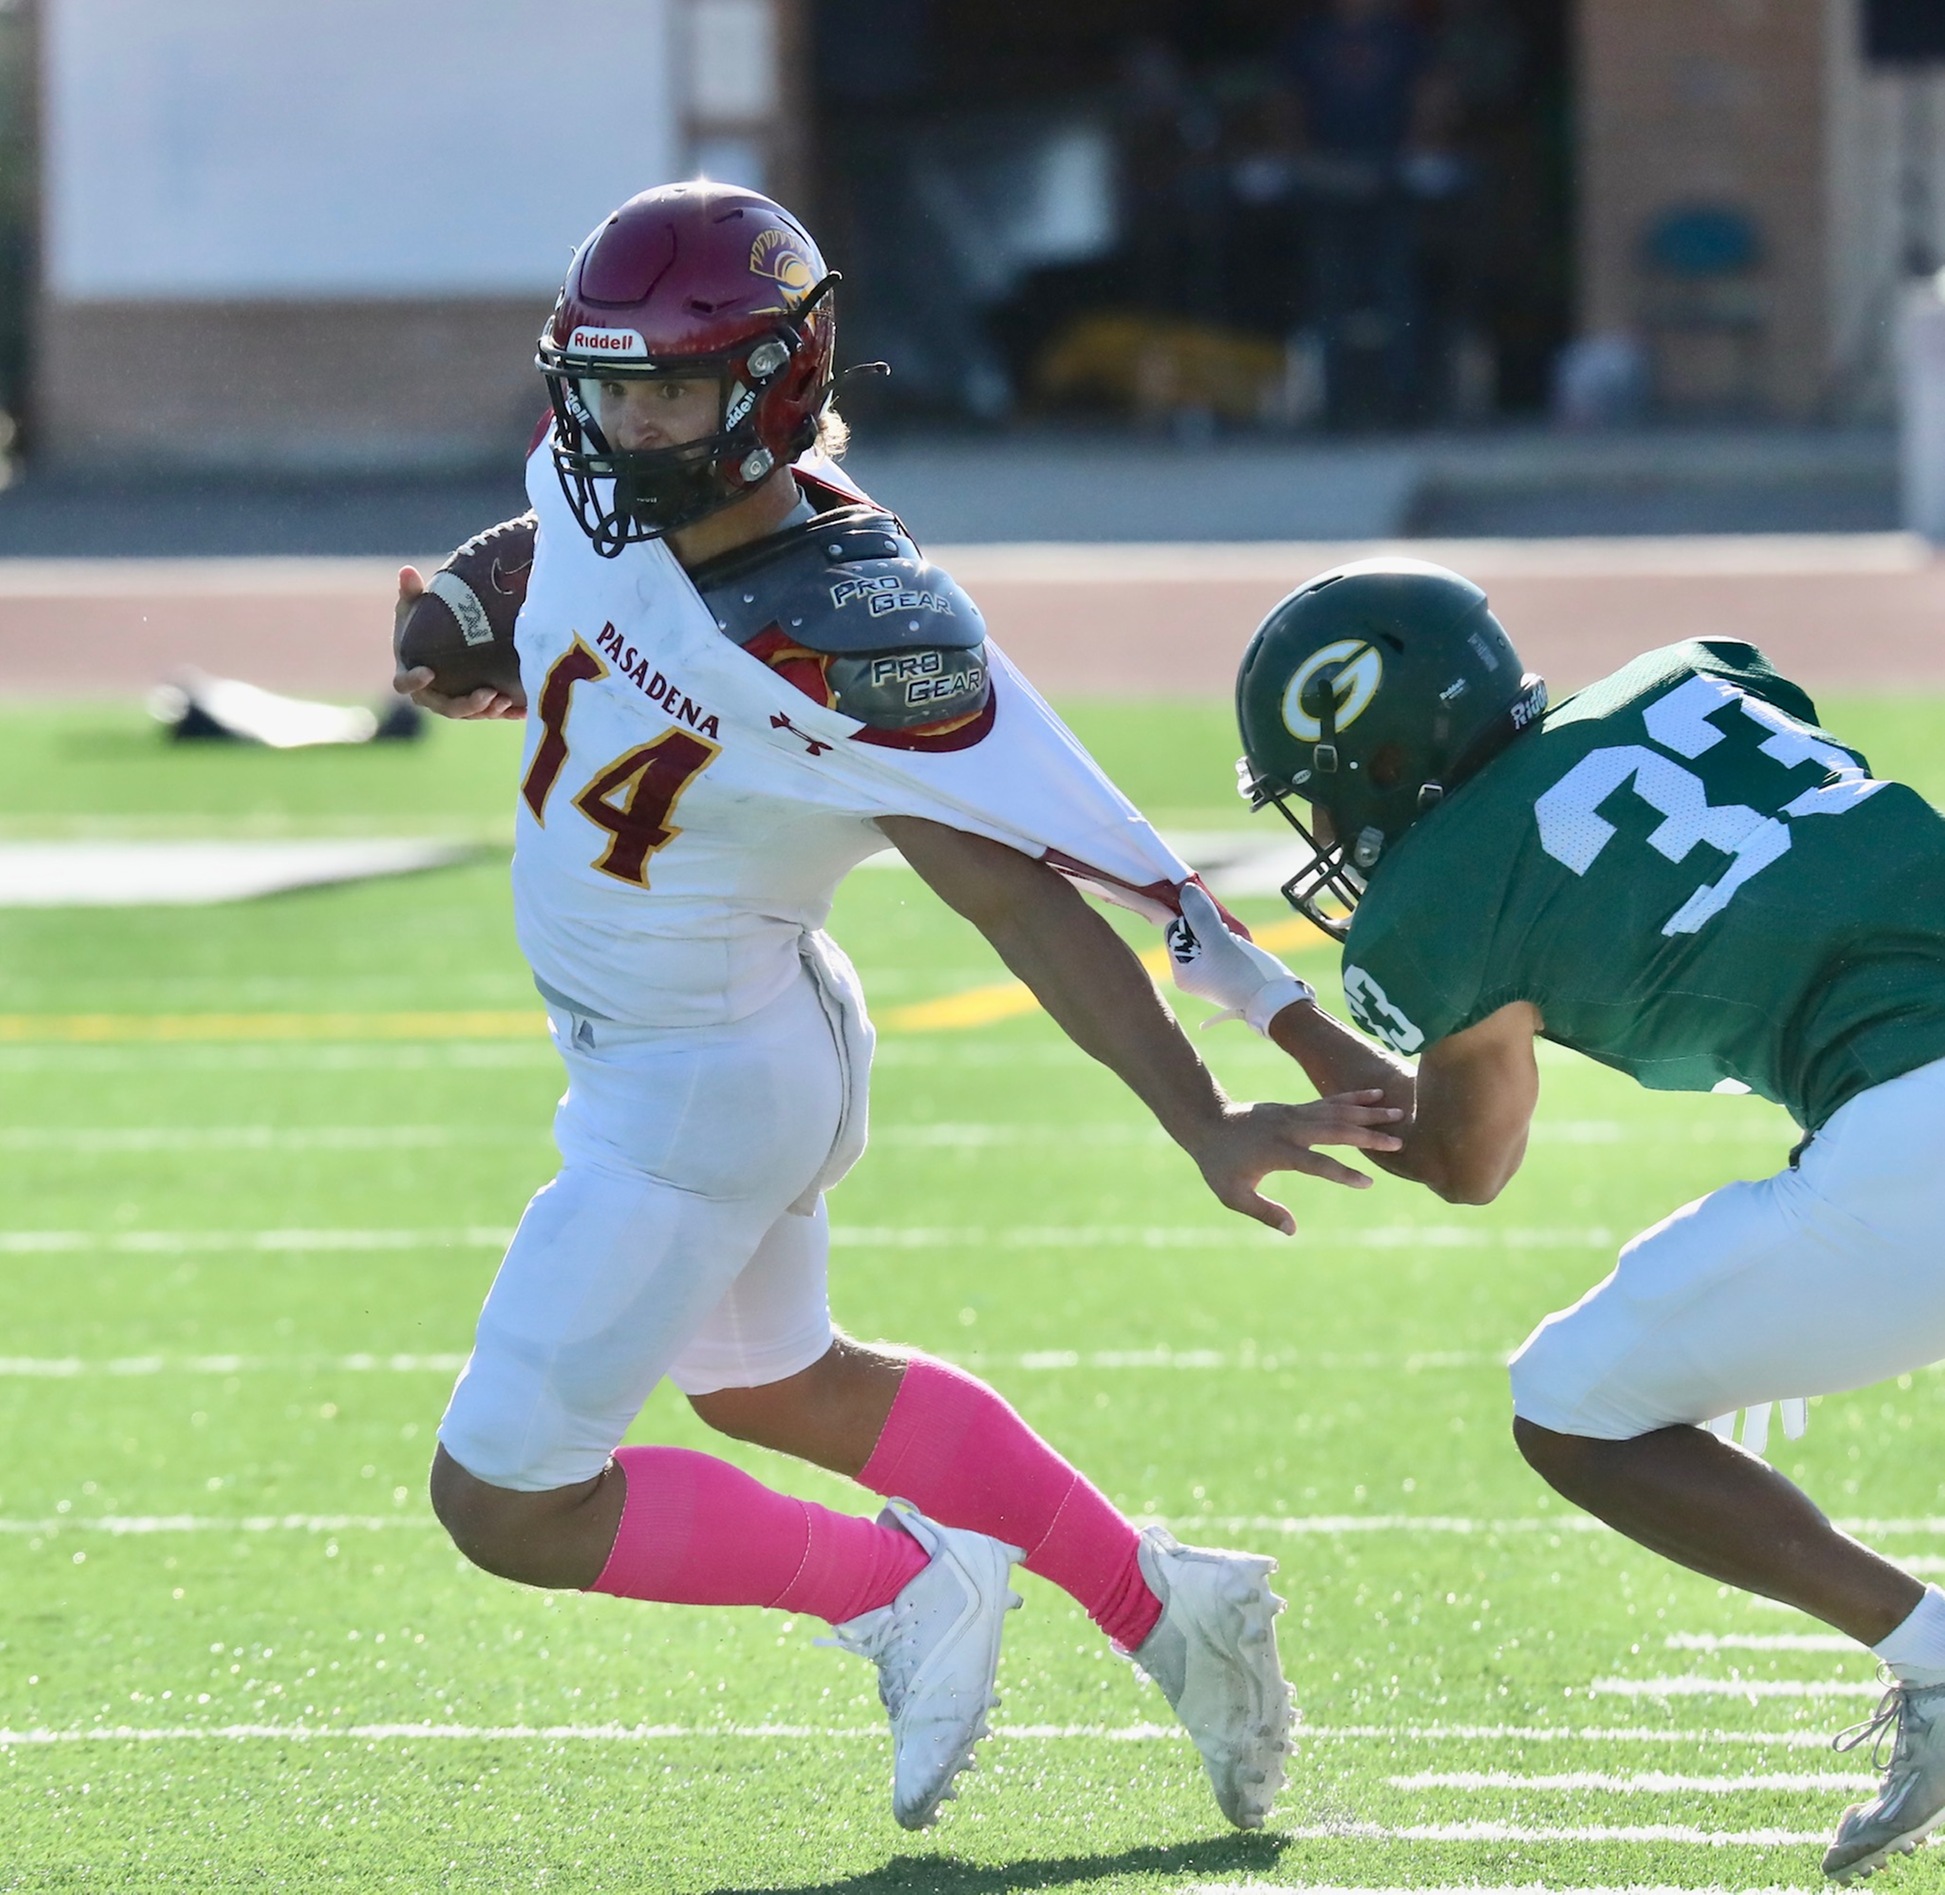 Lancers receiver Ivan Ostry tries to elude a tackler grabbing his jersey during PCC's loss at Grossmont College on Saturday (photo by Michael Watkins).